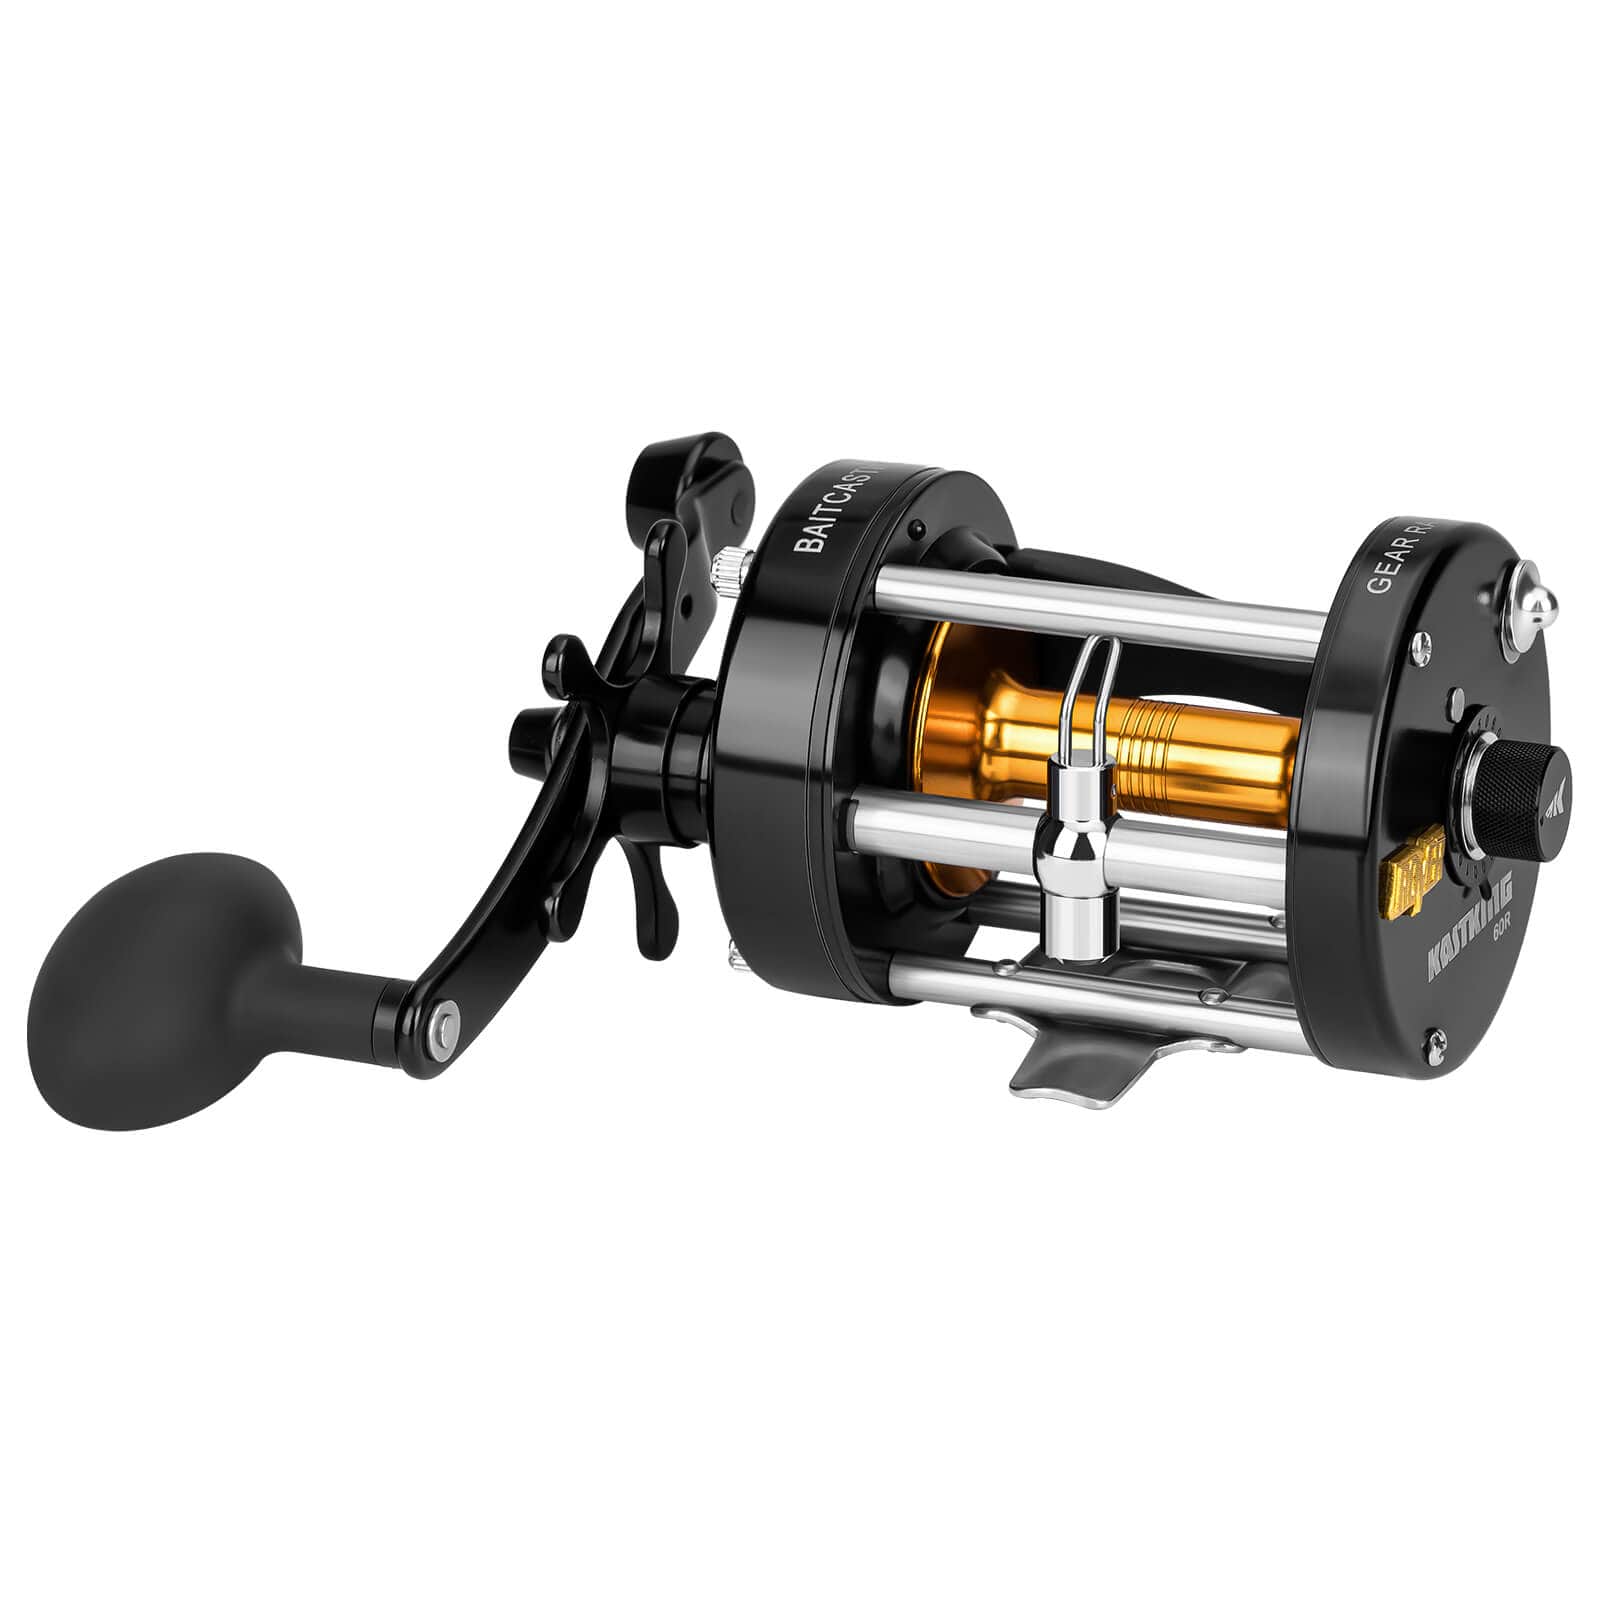 KastKing Rover Round Baitcasting Reel, Right Handed Fishing Reel,Rover60 :  Buy Online at Best Price in KSA - Souq is now : Sporting Goods